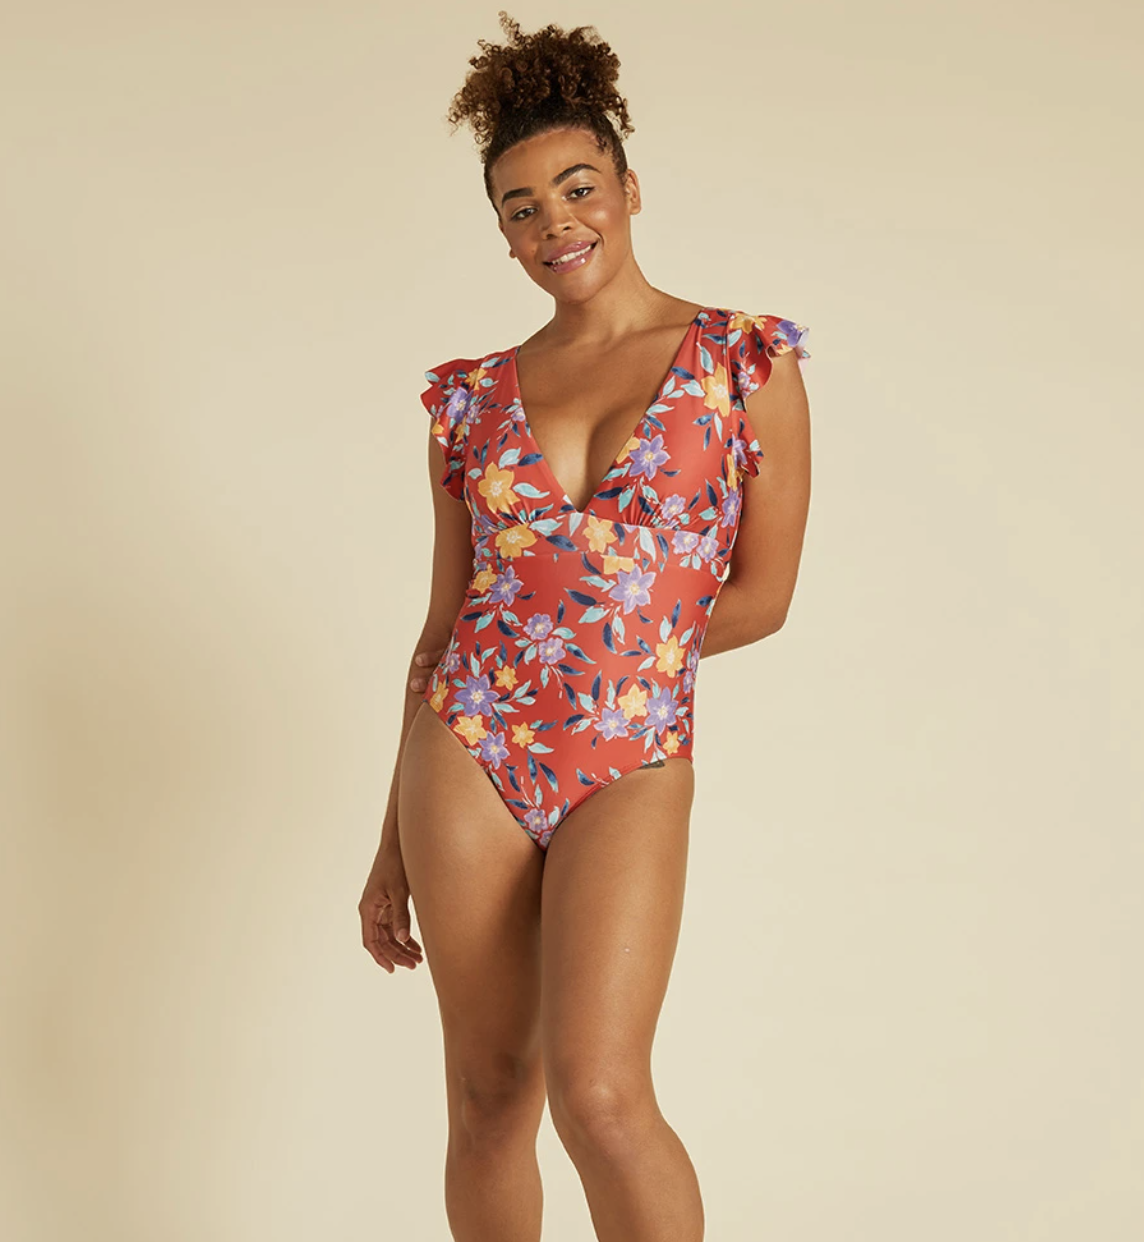 model wearing floral one-piece bathing suit